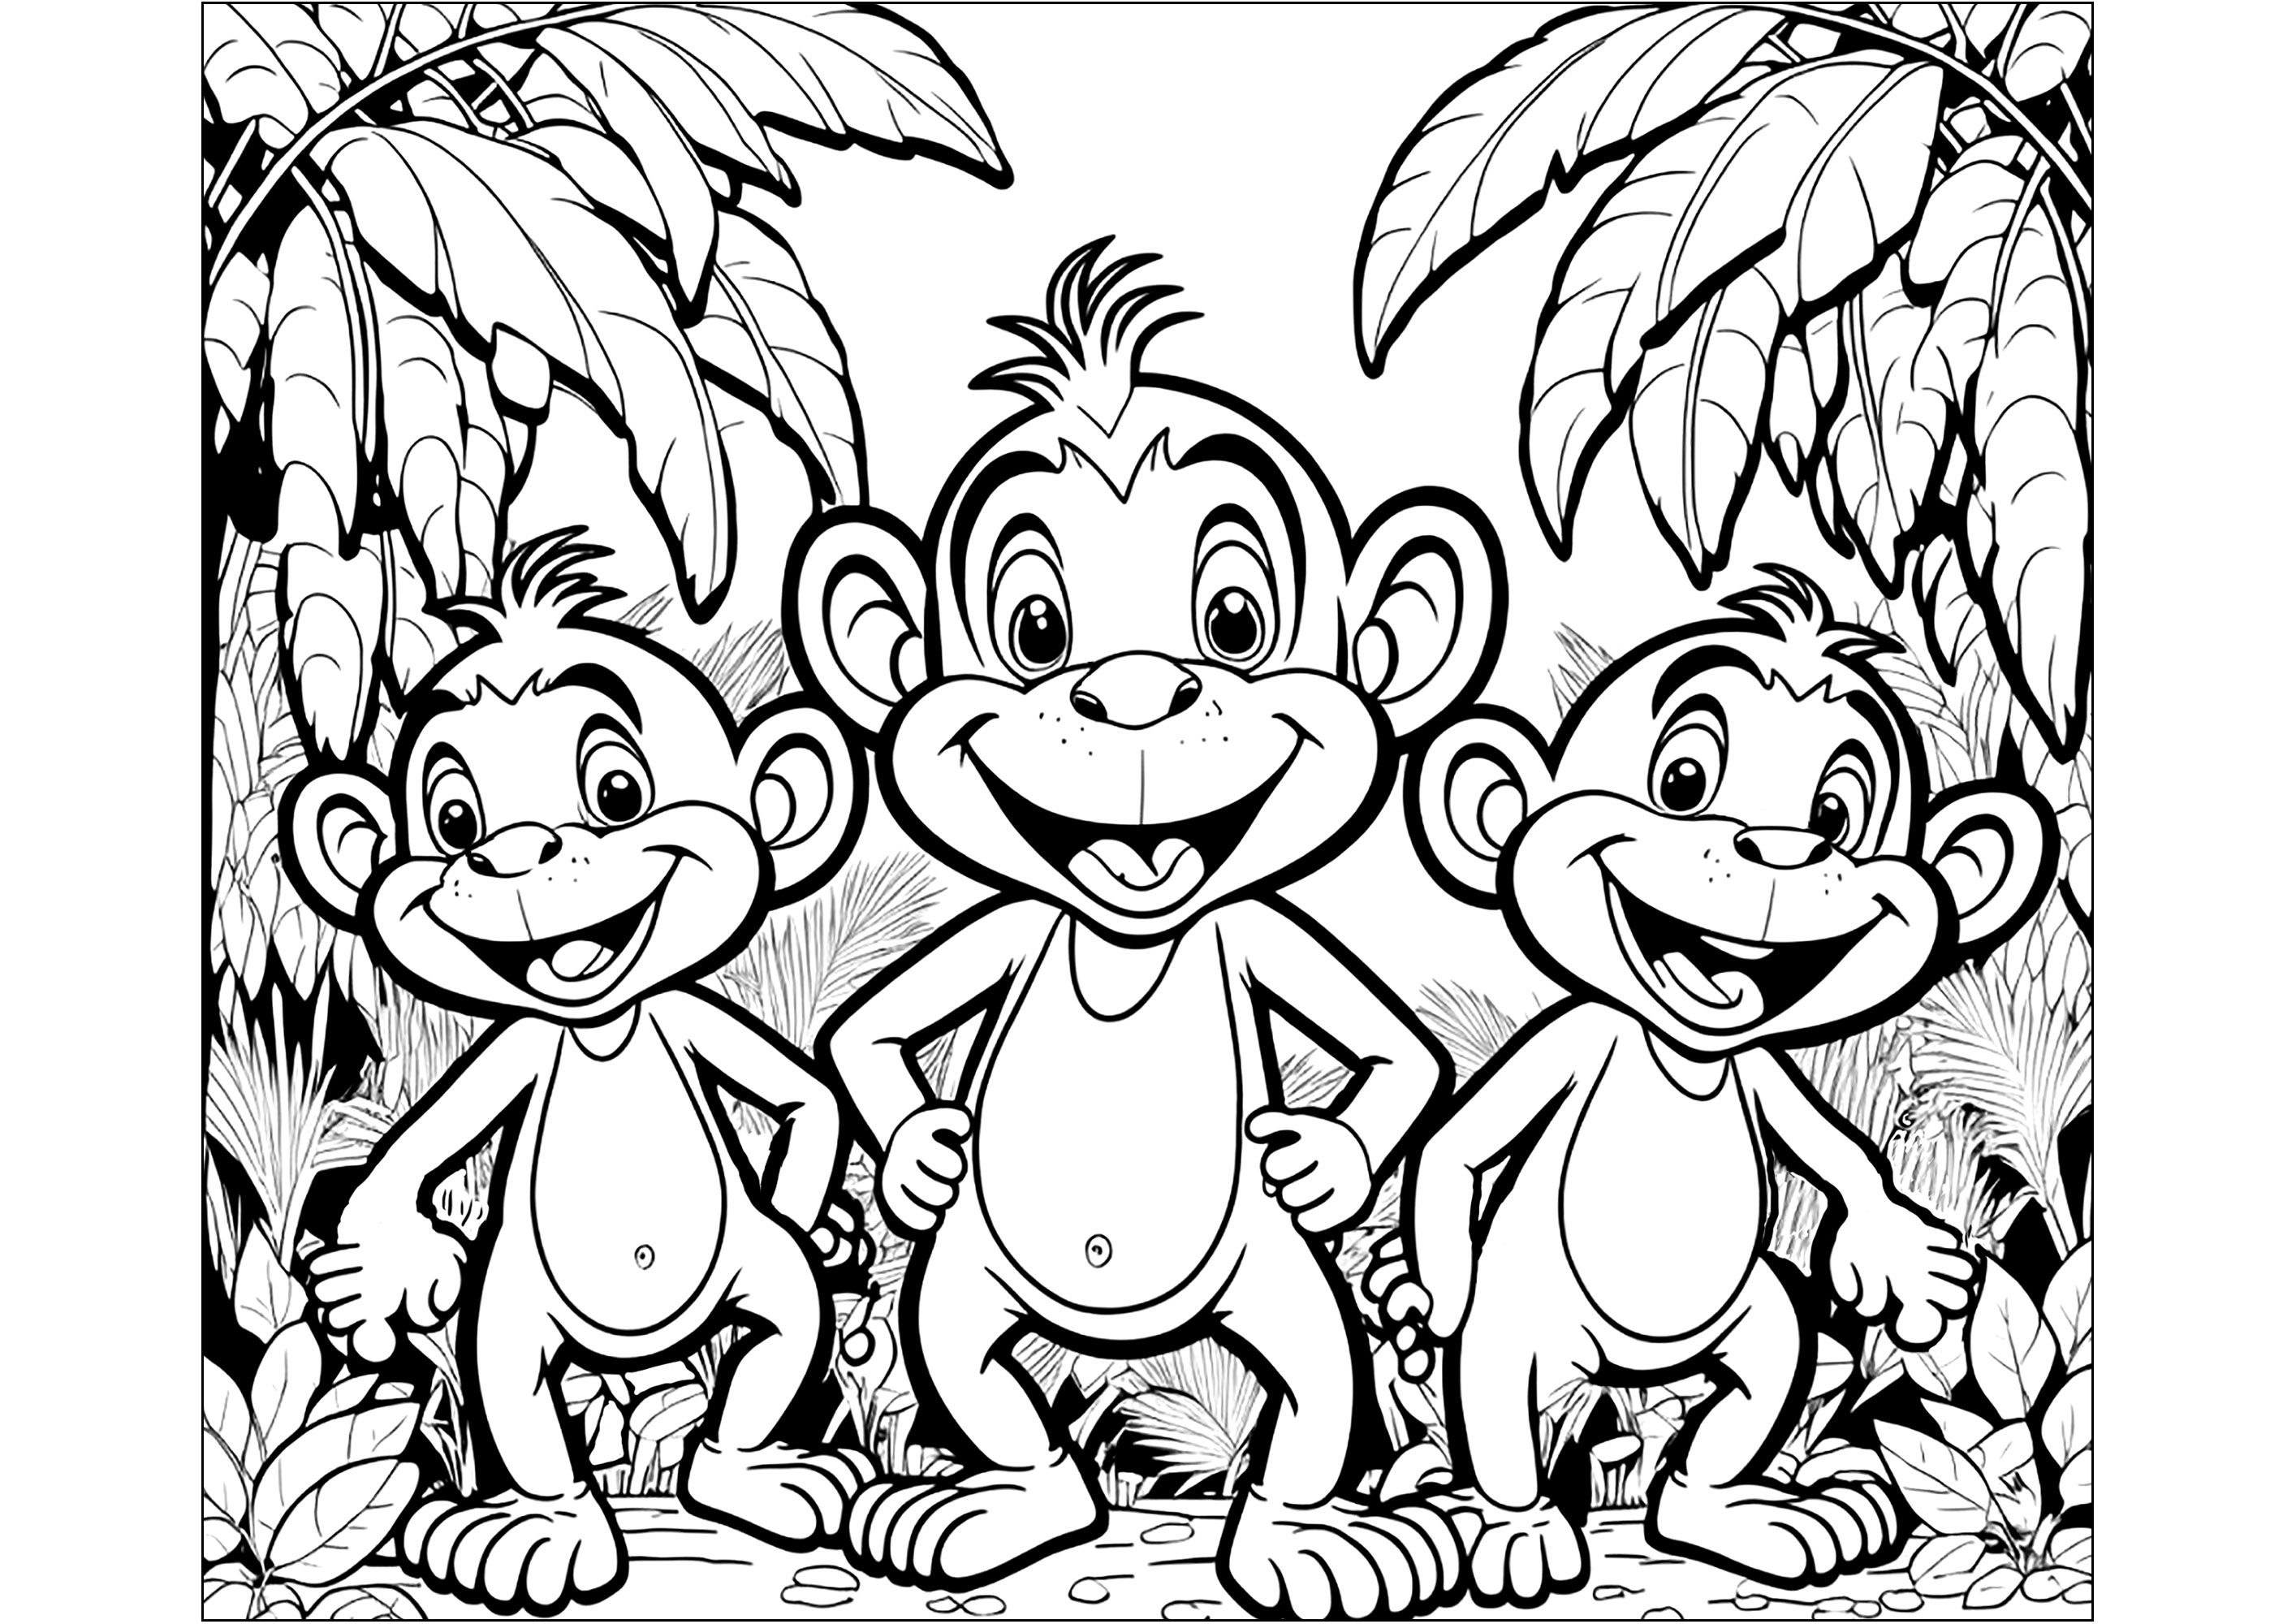 Coloring of three young monkeys in the jungle. This coloring page is perfect for children who love animals and nature. It shows three young monkeys having fun in the jungle. This coloring page is perfect for developing their imagination and creativity.